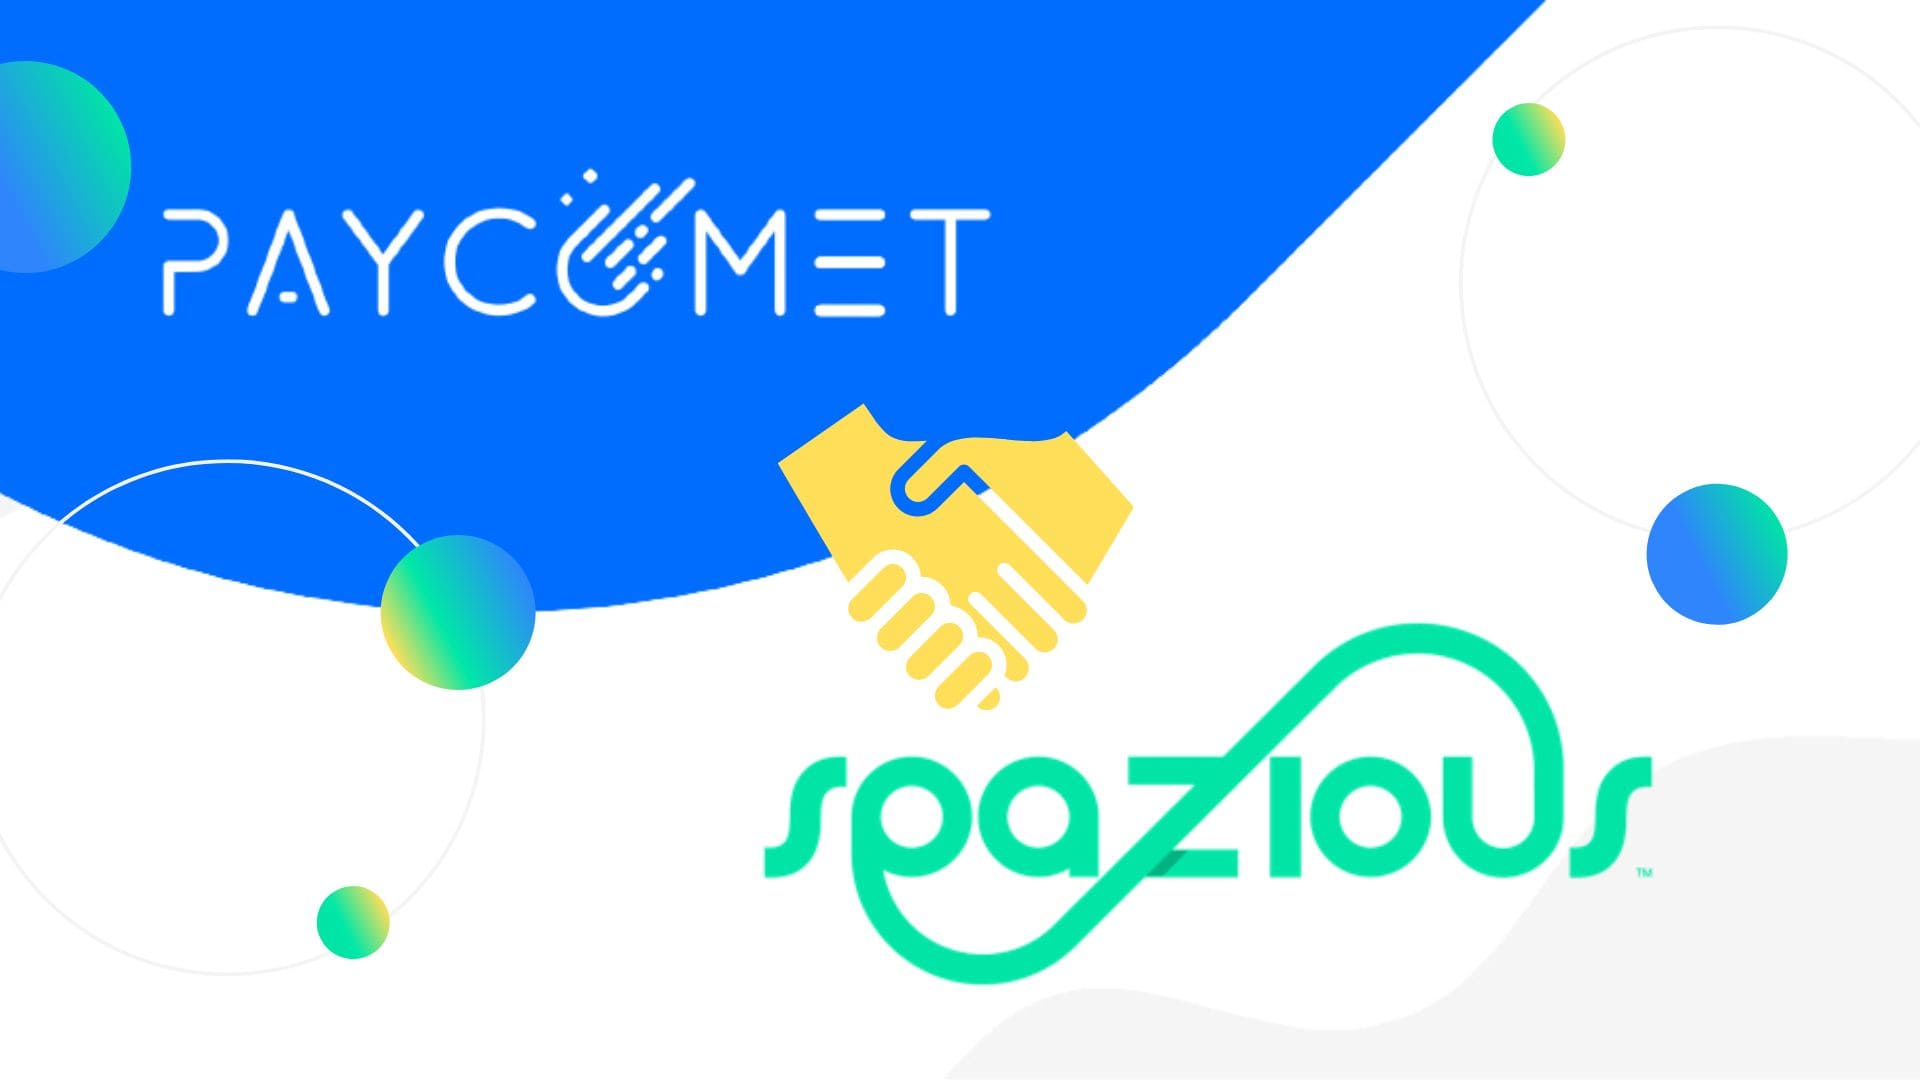 Spazious integrates with PAYCOMET to streamline bookings in the MICE segment